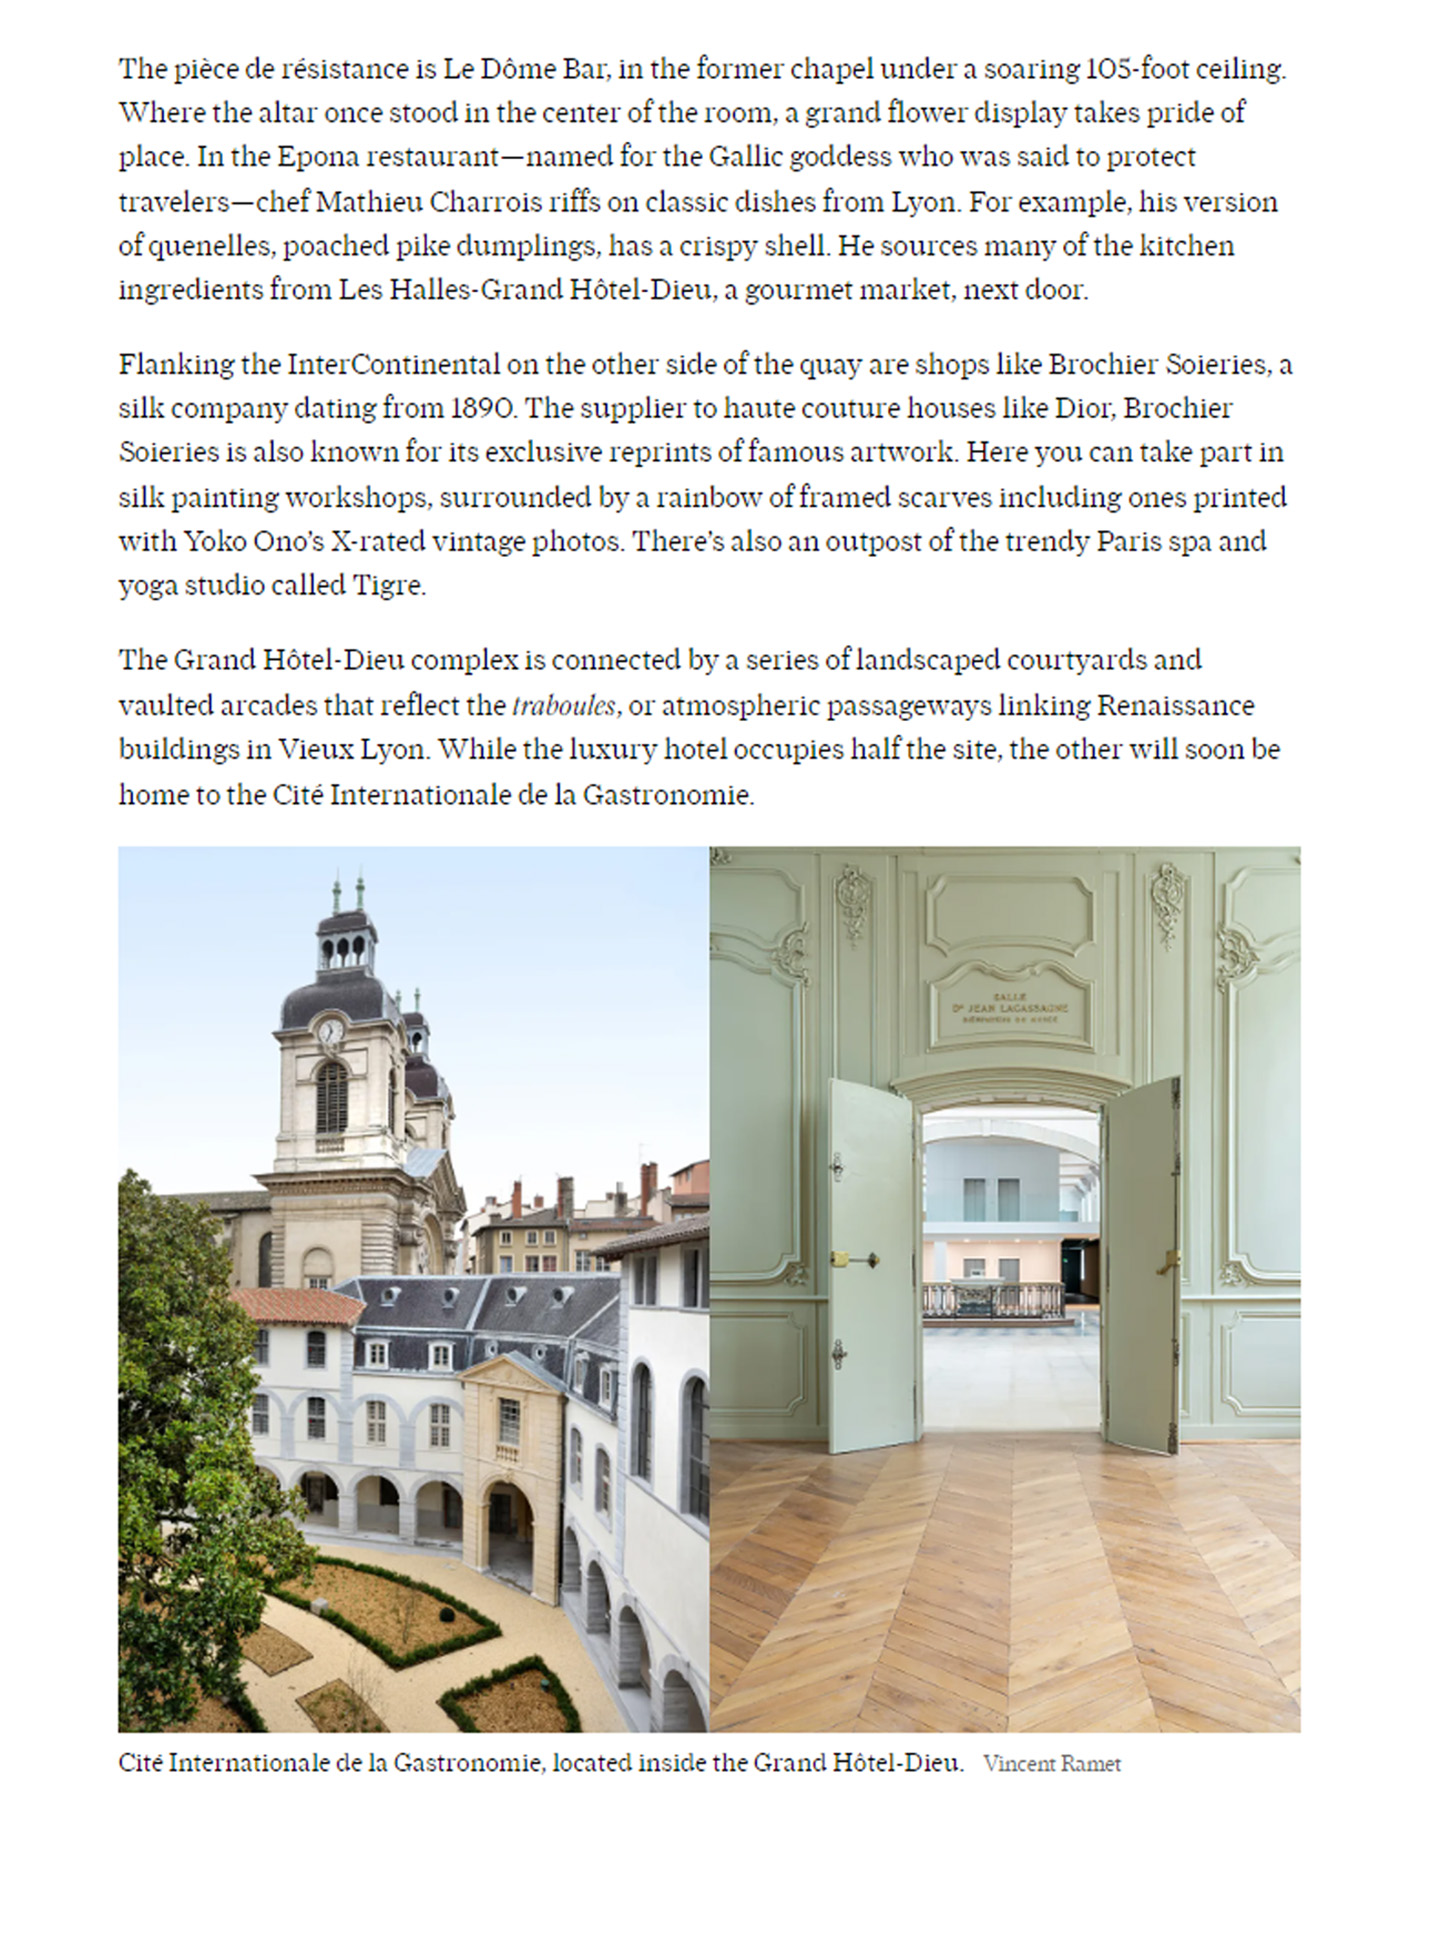 Article on the InterContinental Lyon Hotel Dieu realized by the studio jean-Philippe Nuel in the magazine condé nast traveller, new luxury hotel, luxury interior design, historical heritage